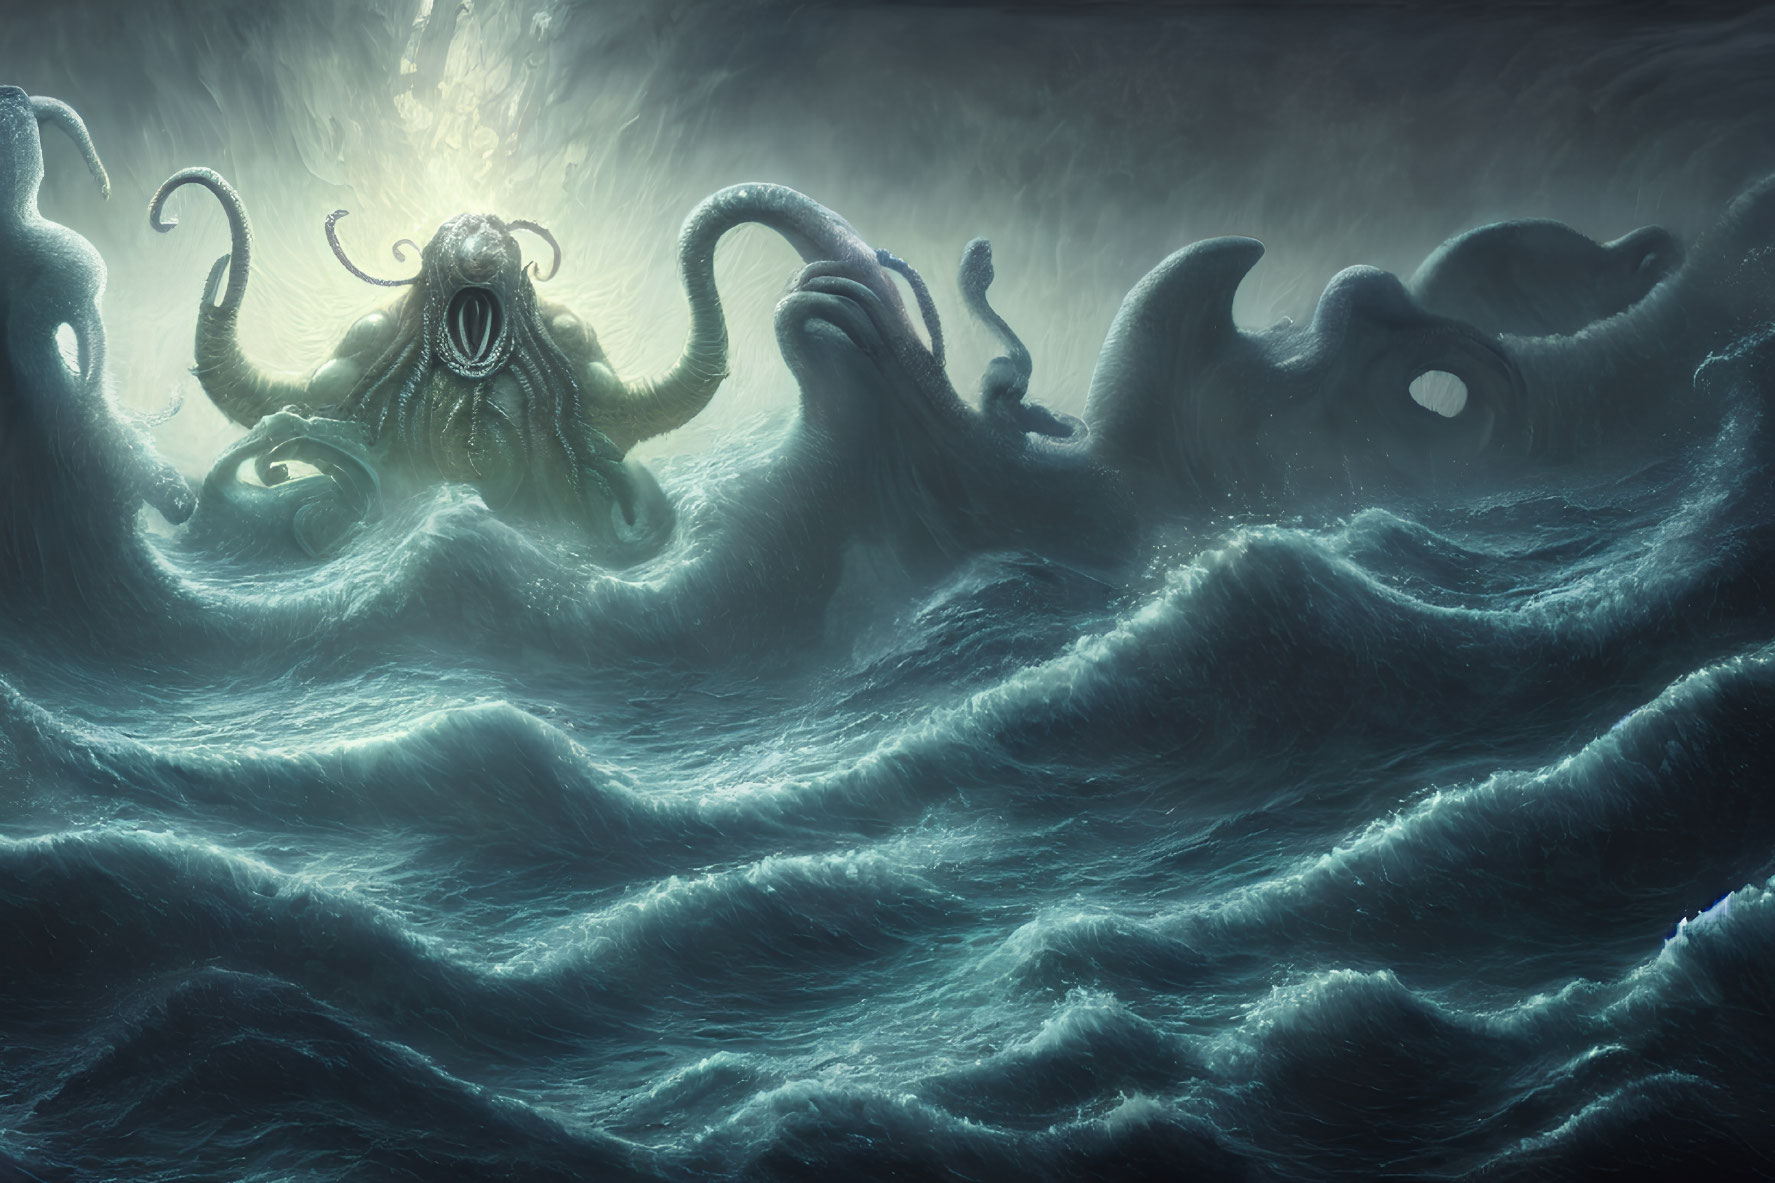 Mythical Sea Monster Emerges from Turbulent Ocean Waves